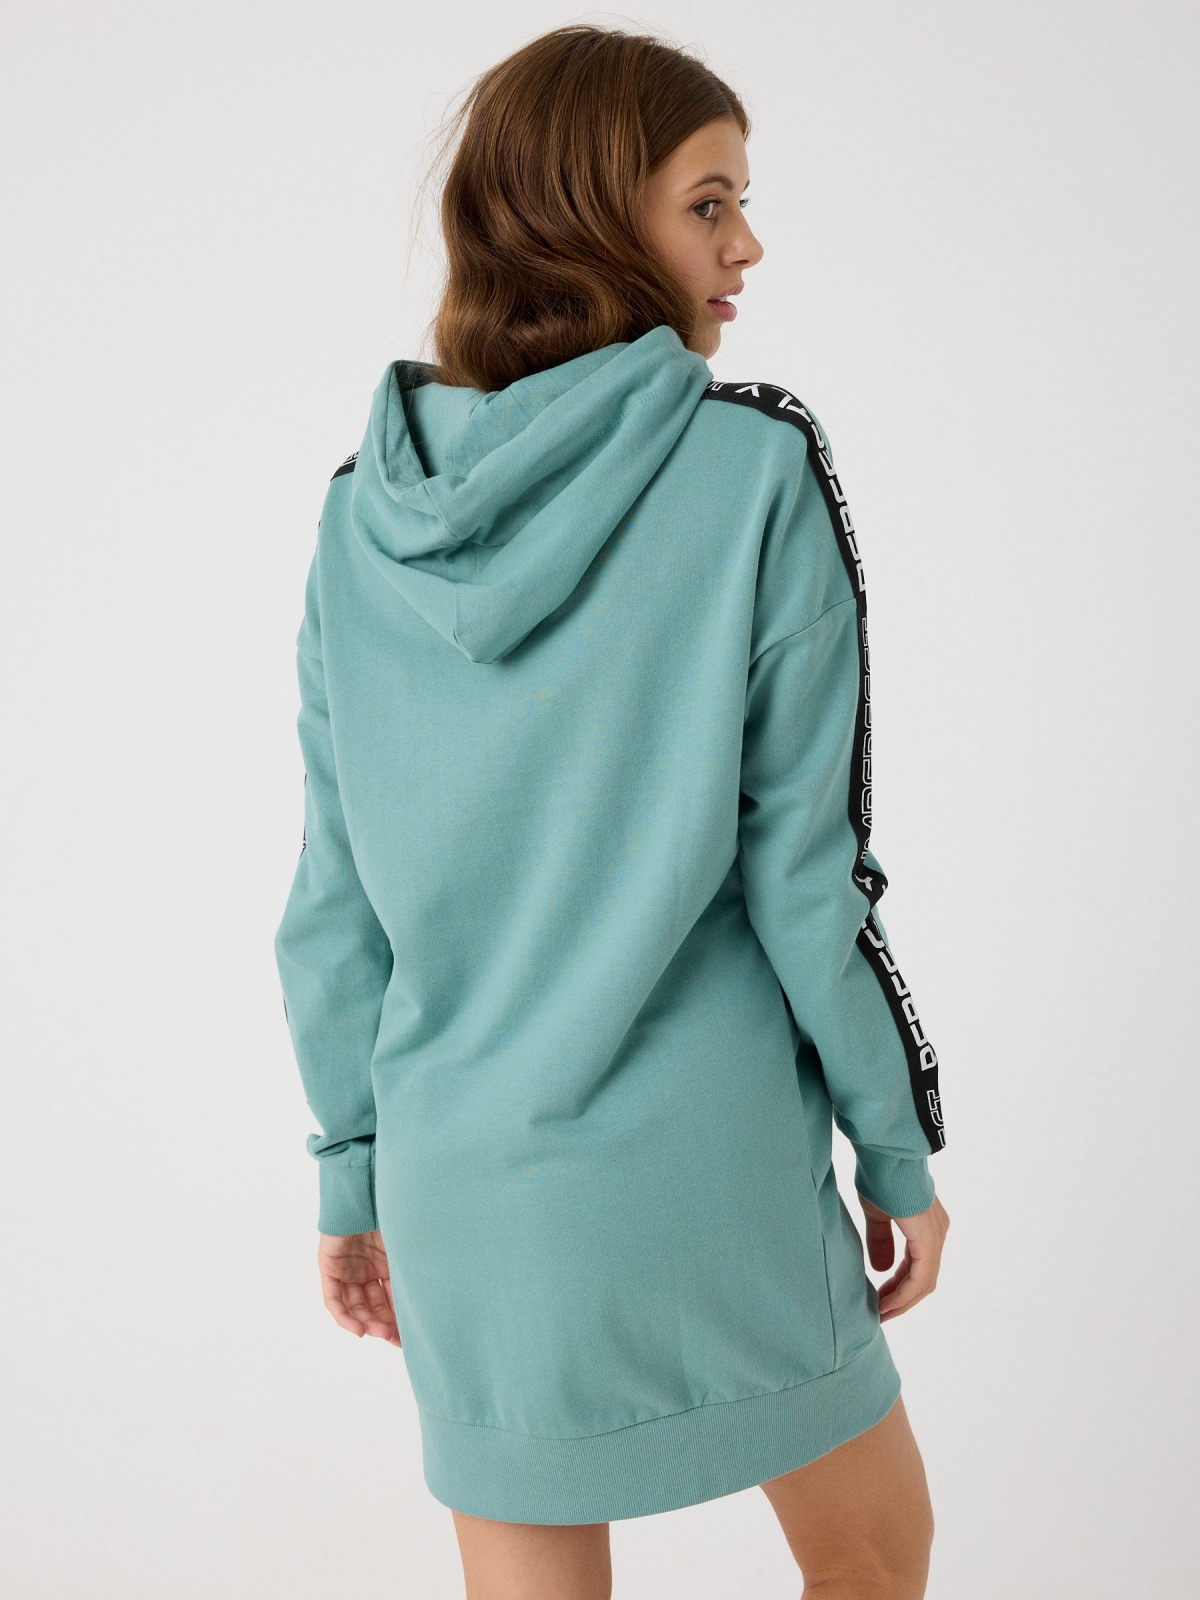 Long Fit Sweatshirt green middle back view